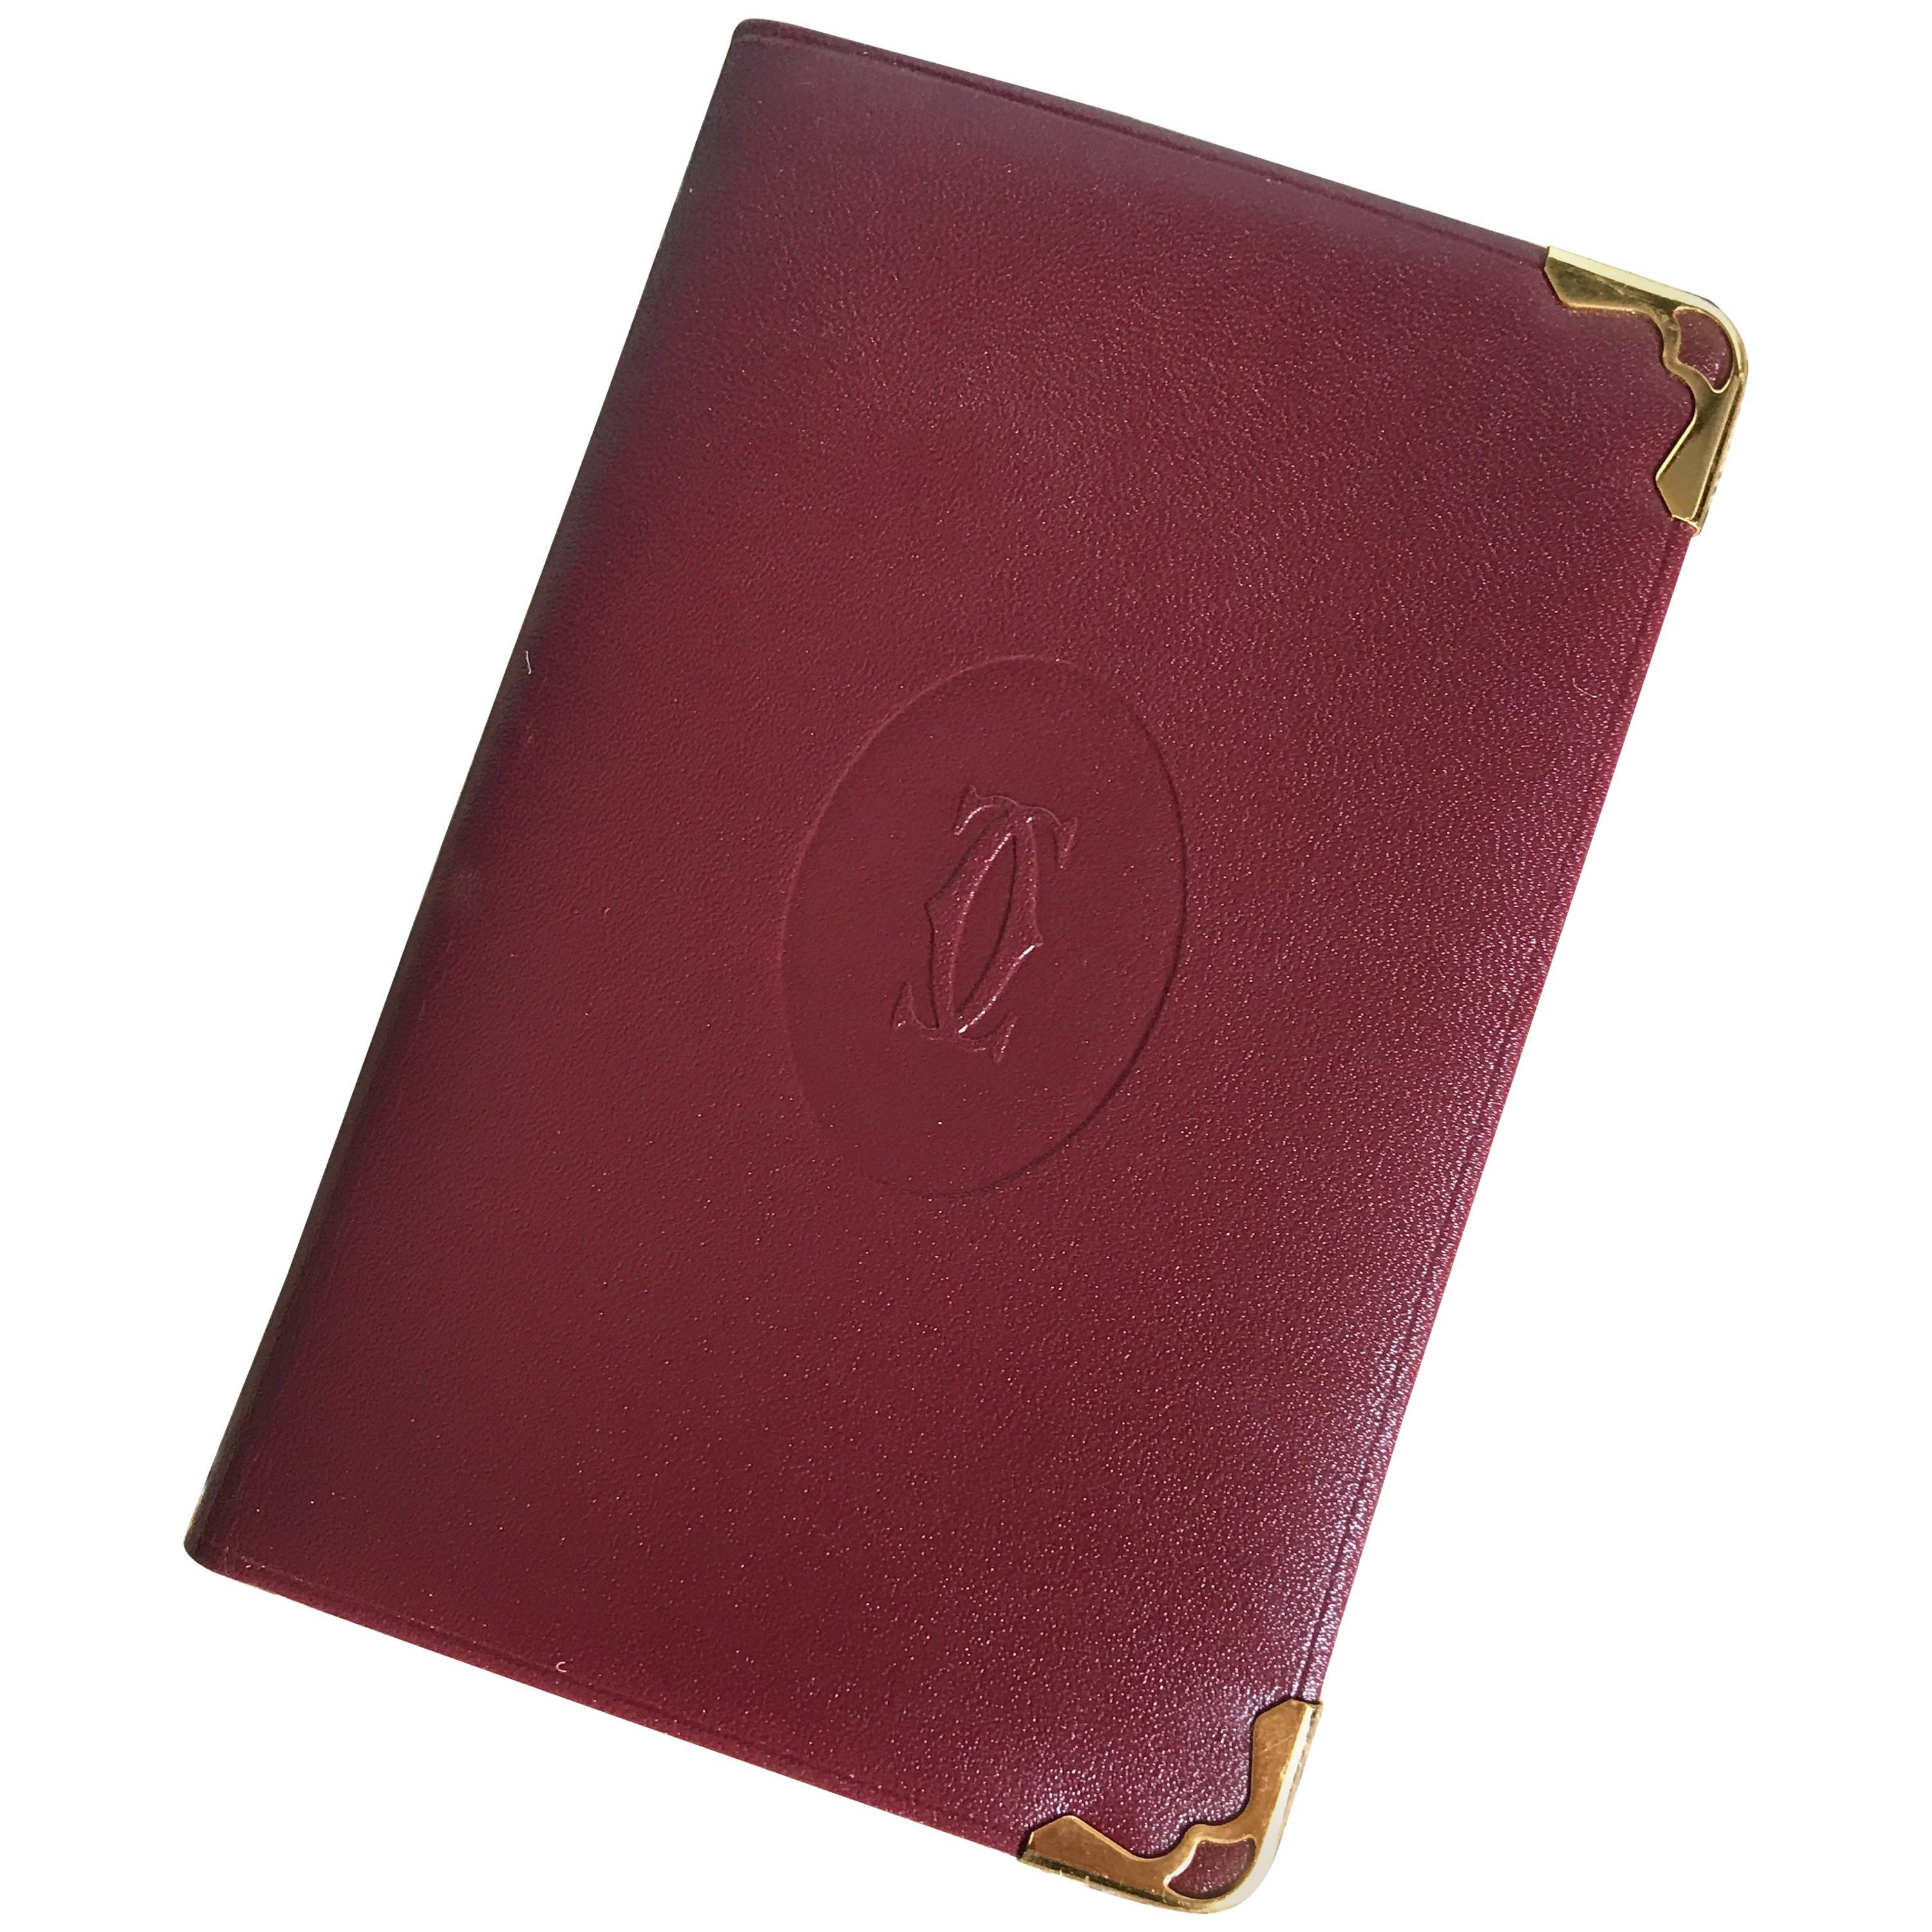 Cartier Le Must de New in Box Burgundy Cordovan Leather Pocket Size Address Book